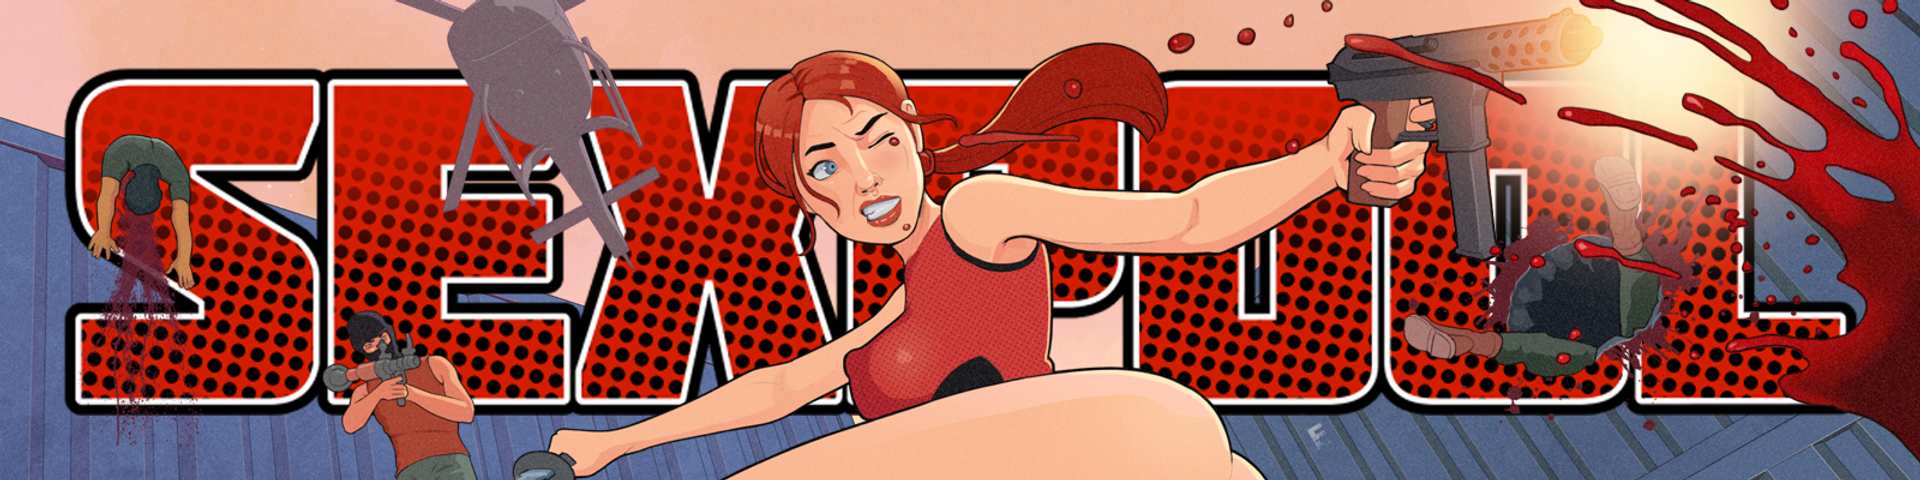 Sexpool [Kexboy] Adult xxx Game Download